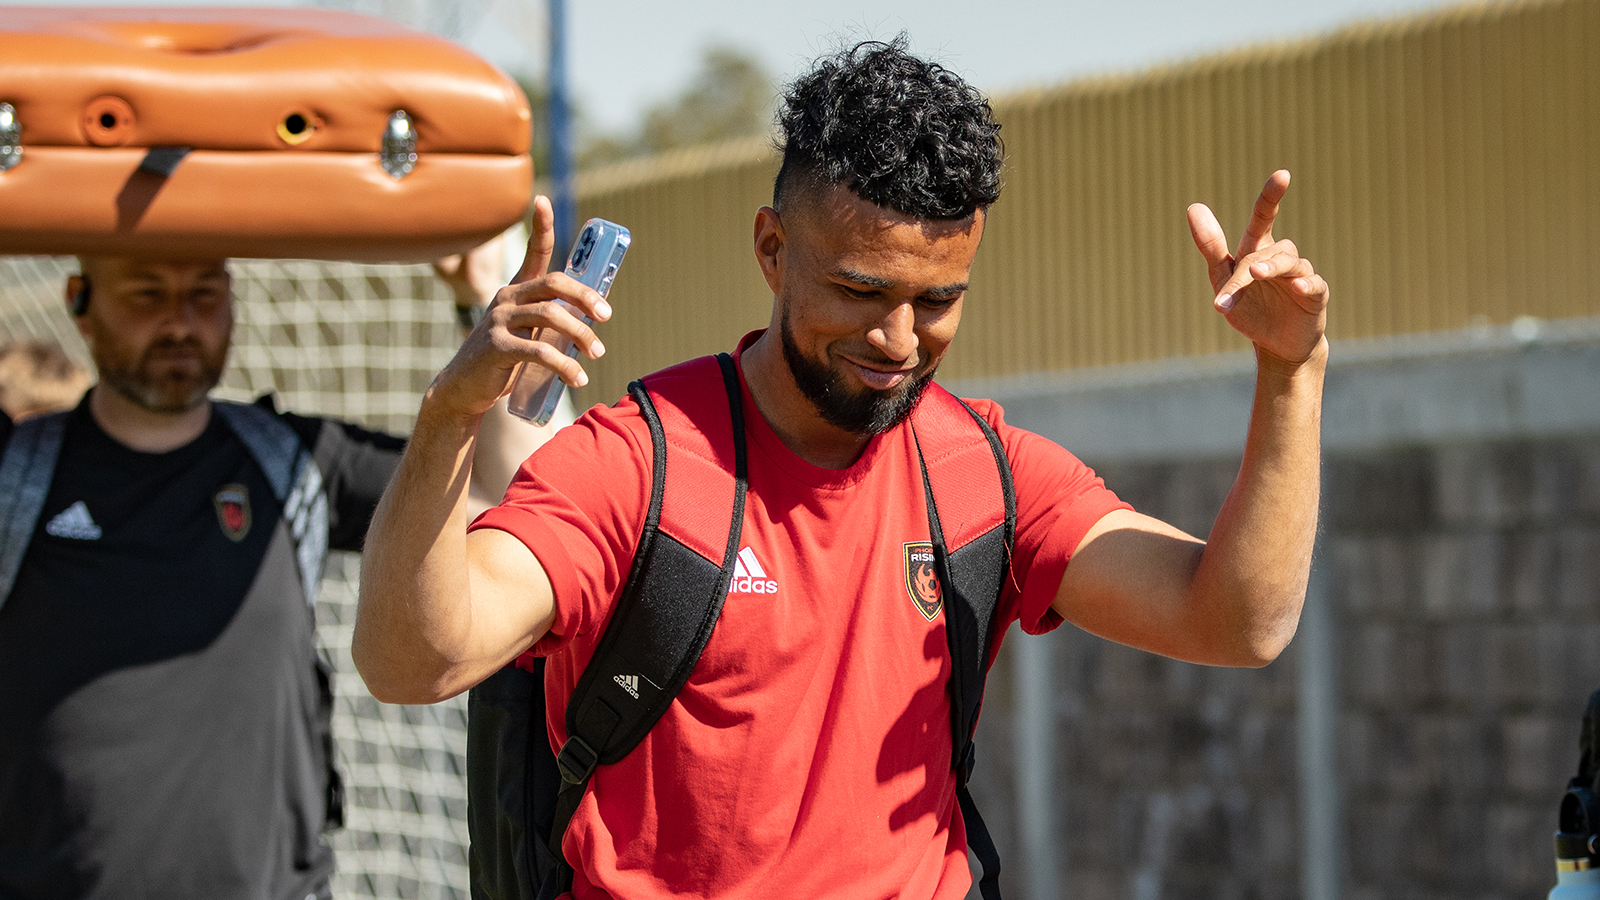 Danny Trejo had been on trial with DC United, but signed for Phoenix Rising ahead of the start of training camp.